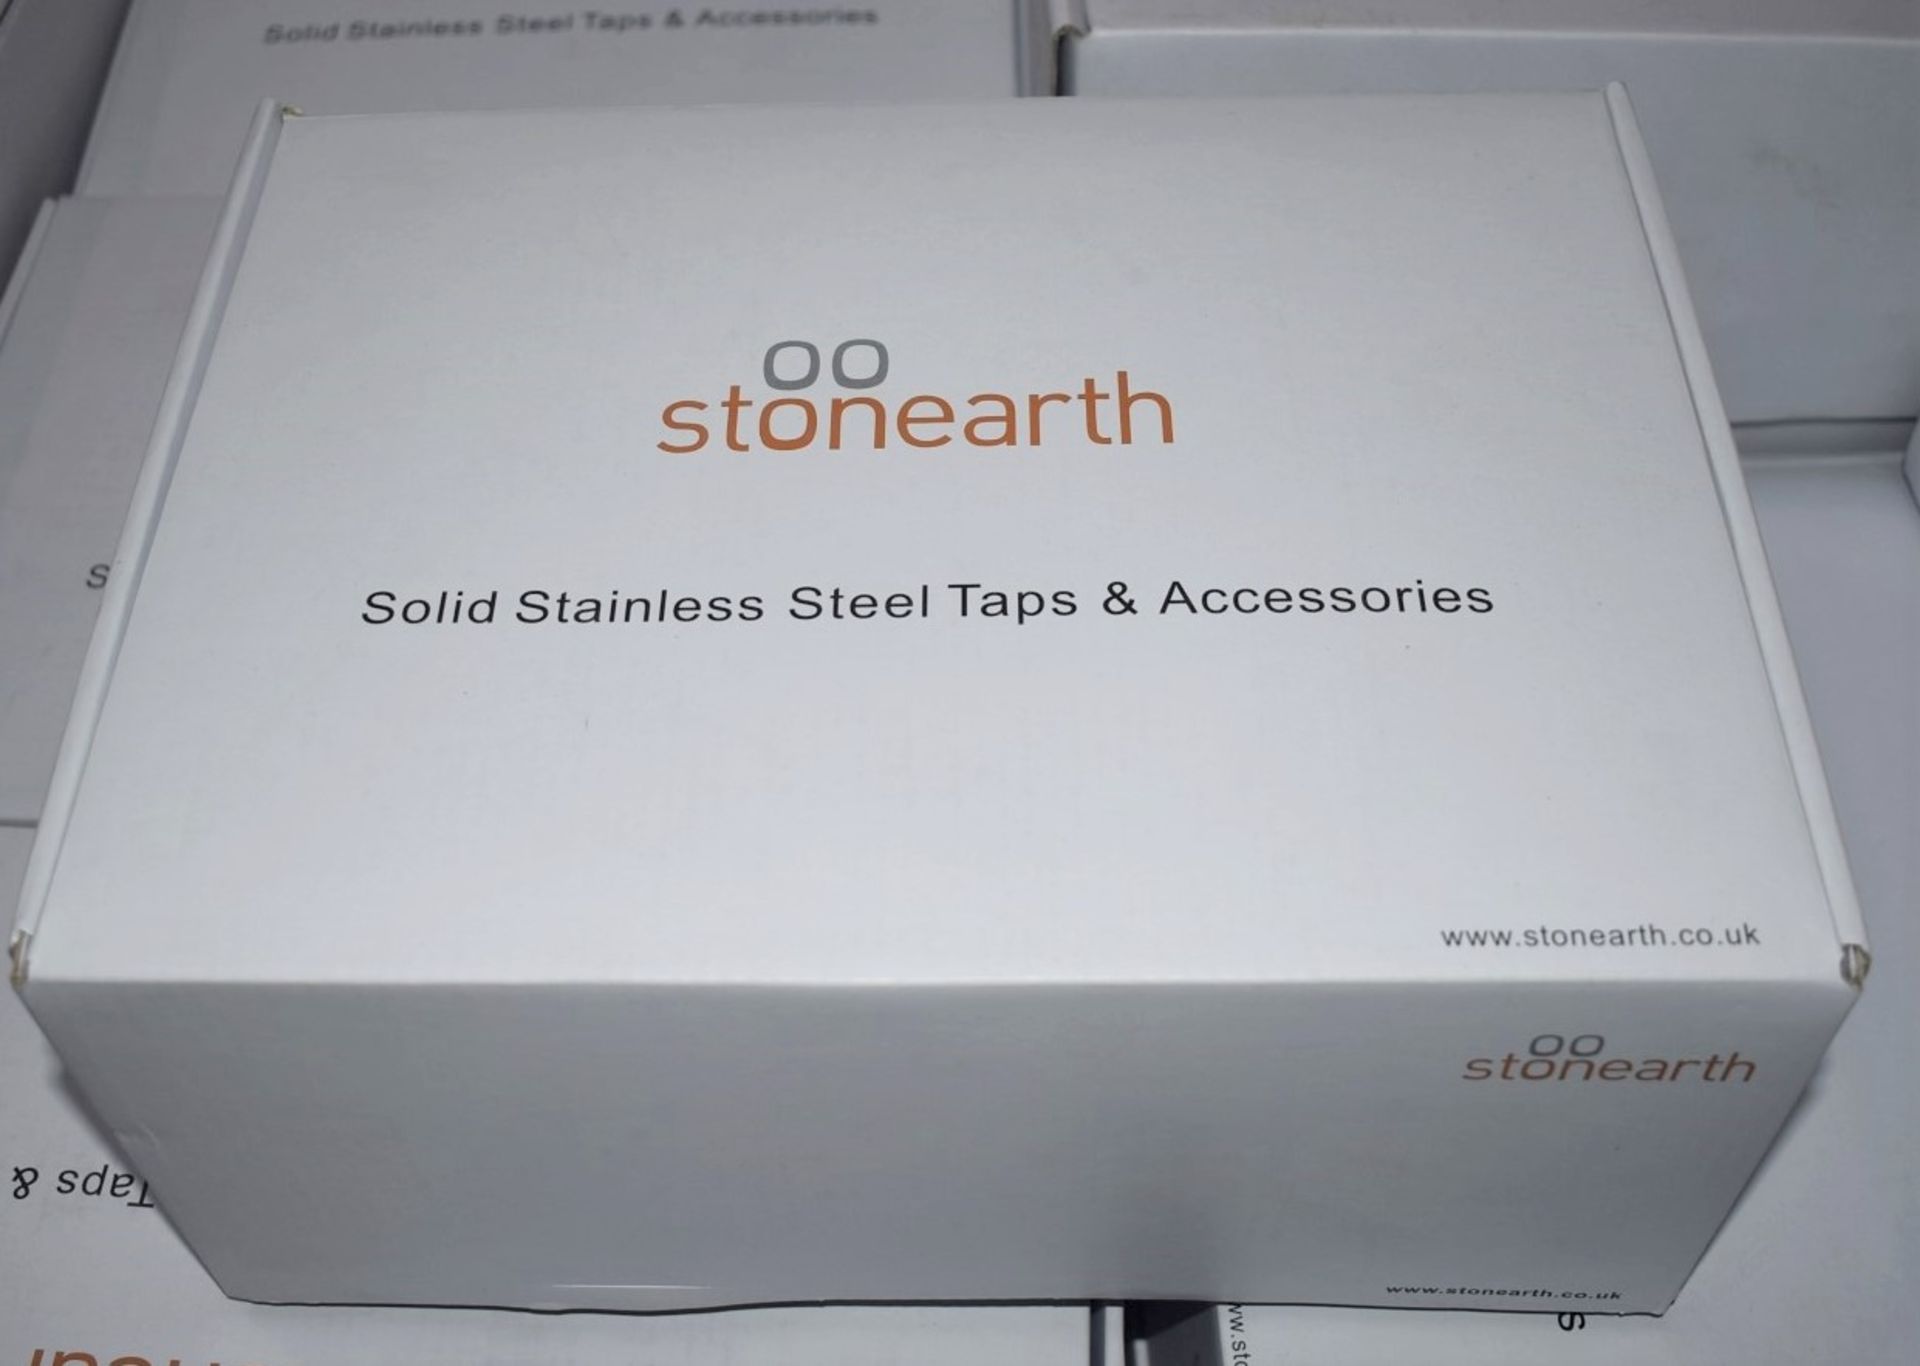 1 x Stonearth 'Metro' Stainless Steel Wall Mounted Tap - Brand New & Boxed - RRP £345 - Ref: TP823 - Image 7 of 8